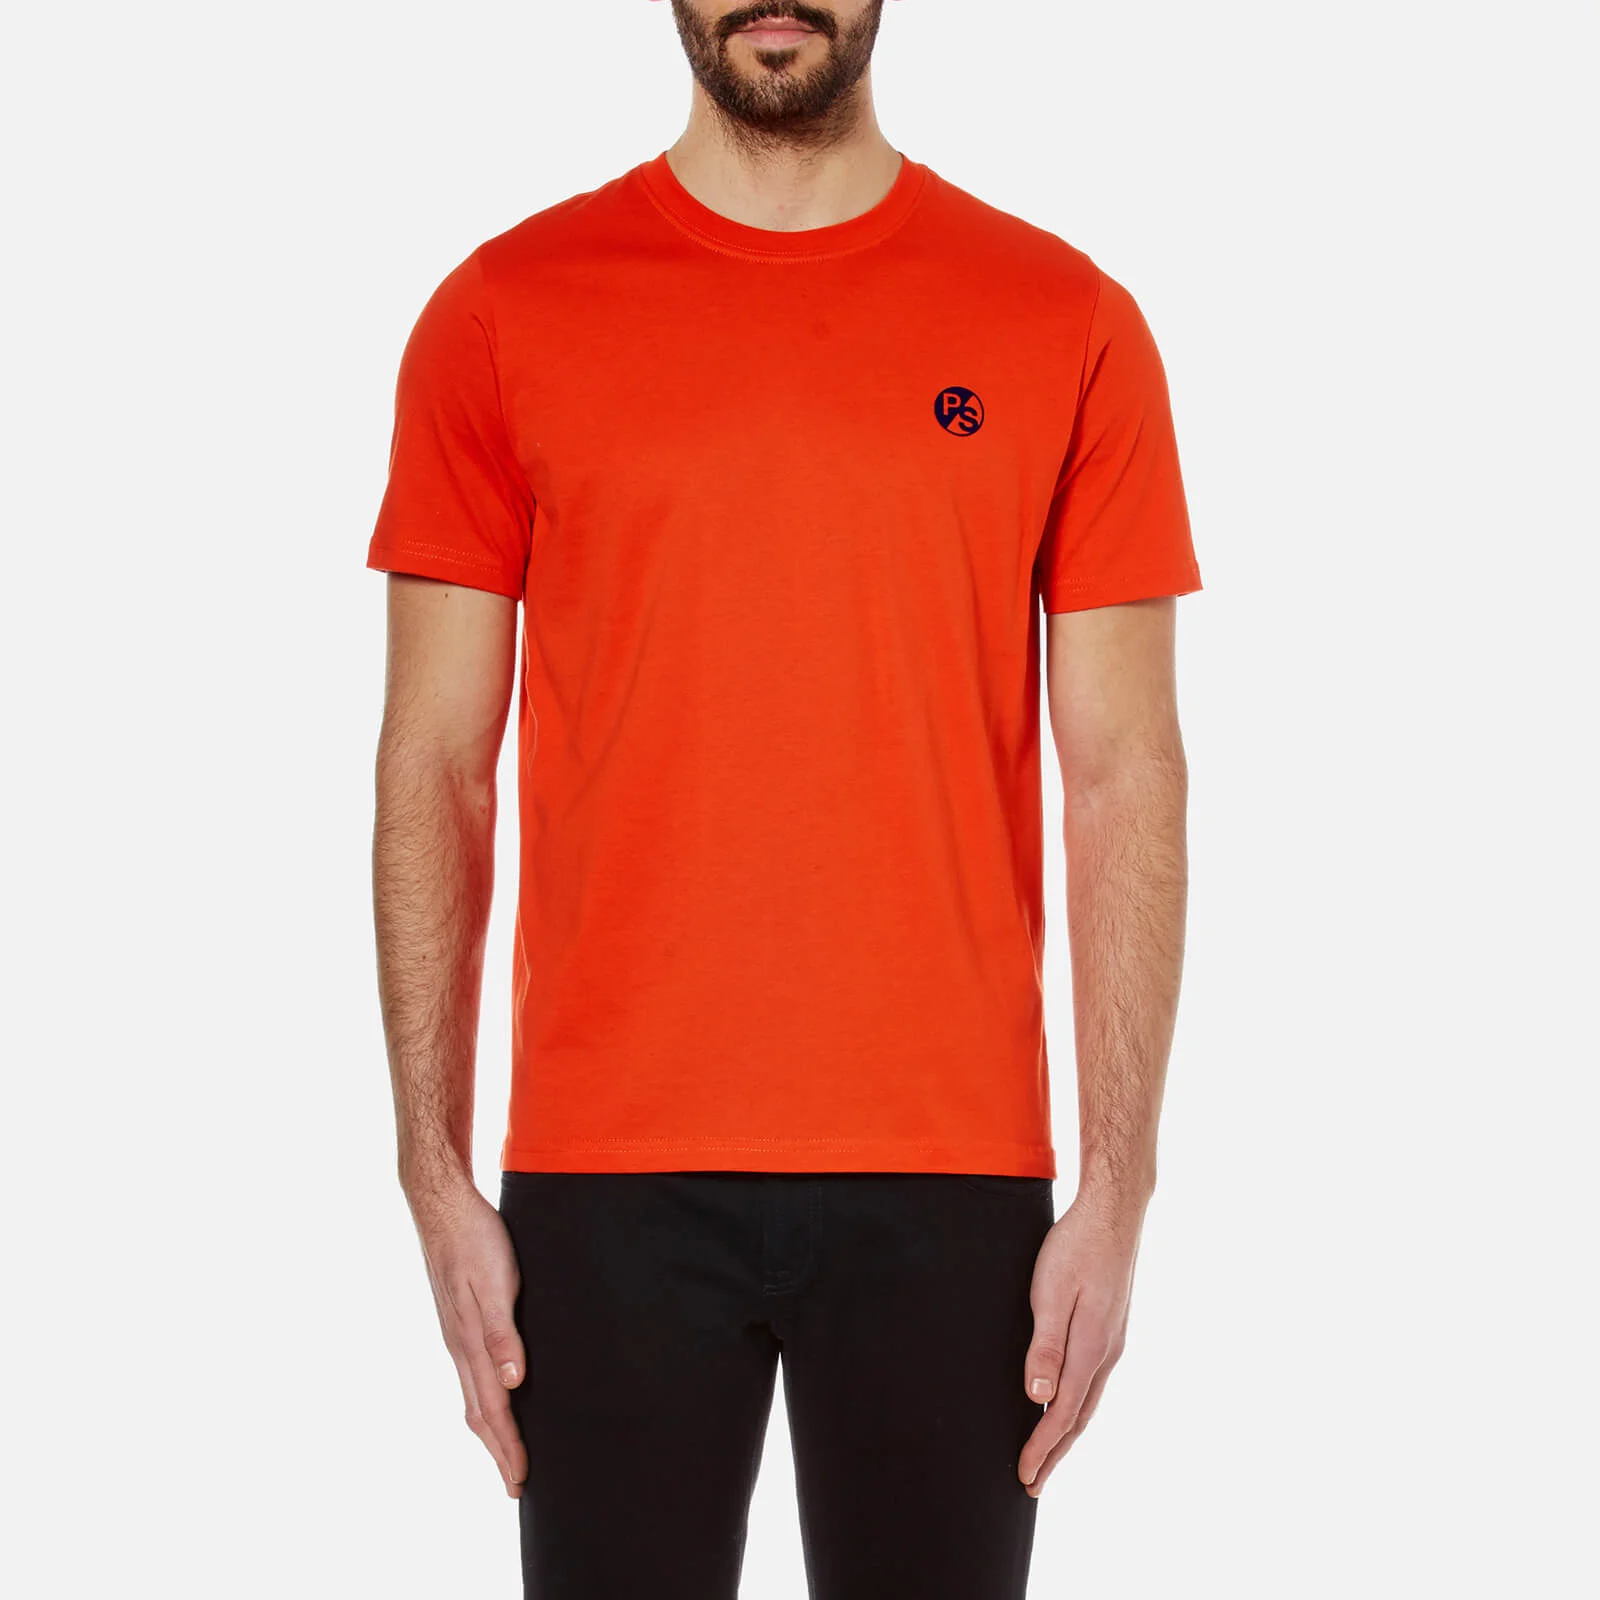 PS by Paul Smith Men's Regular Fit T-Shirt - Red Image 1